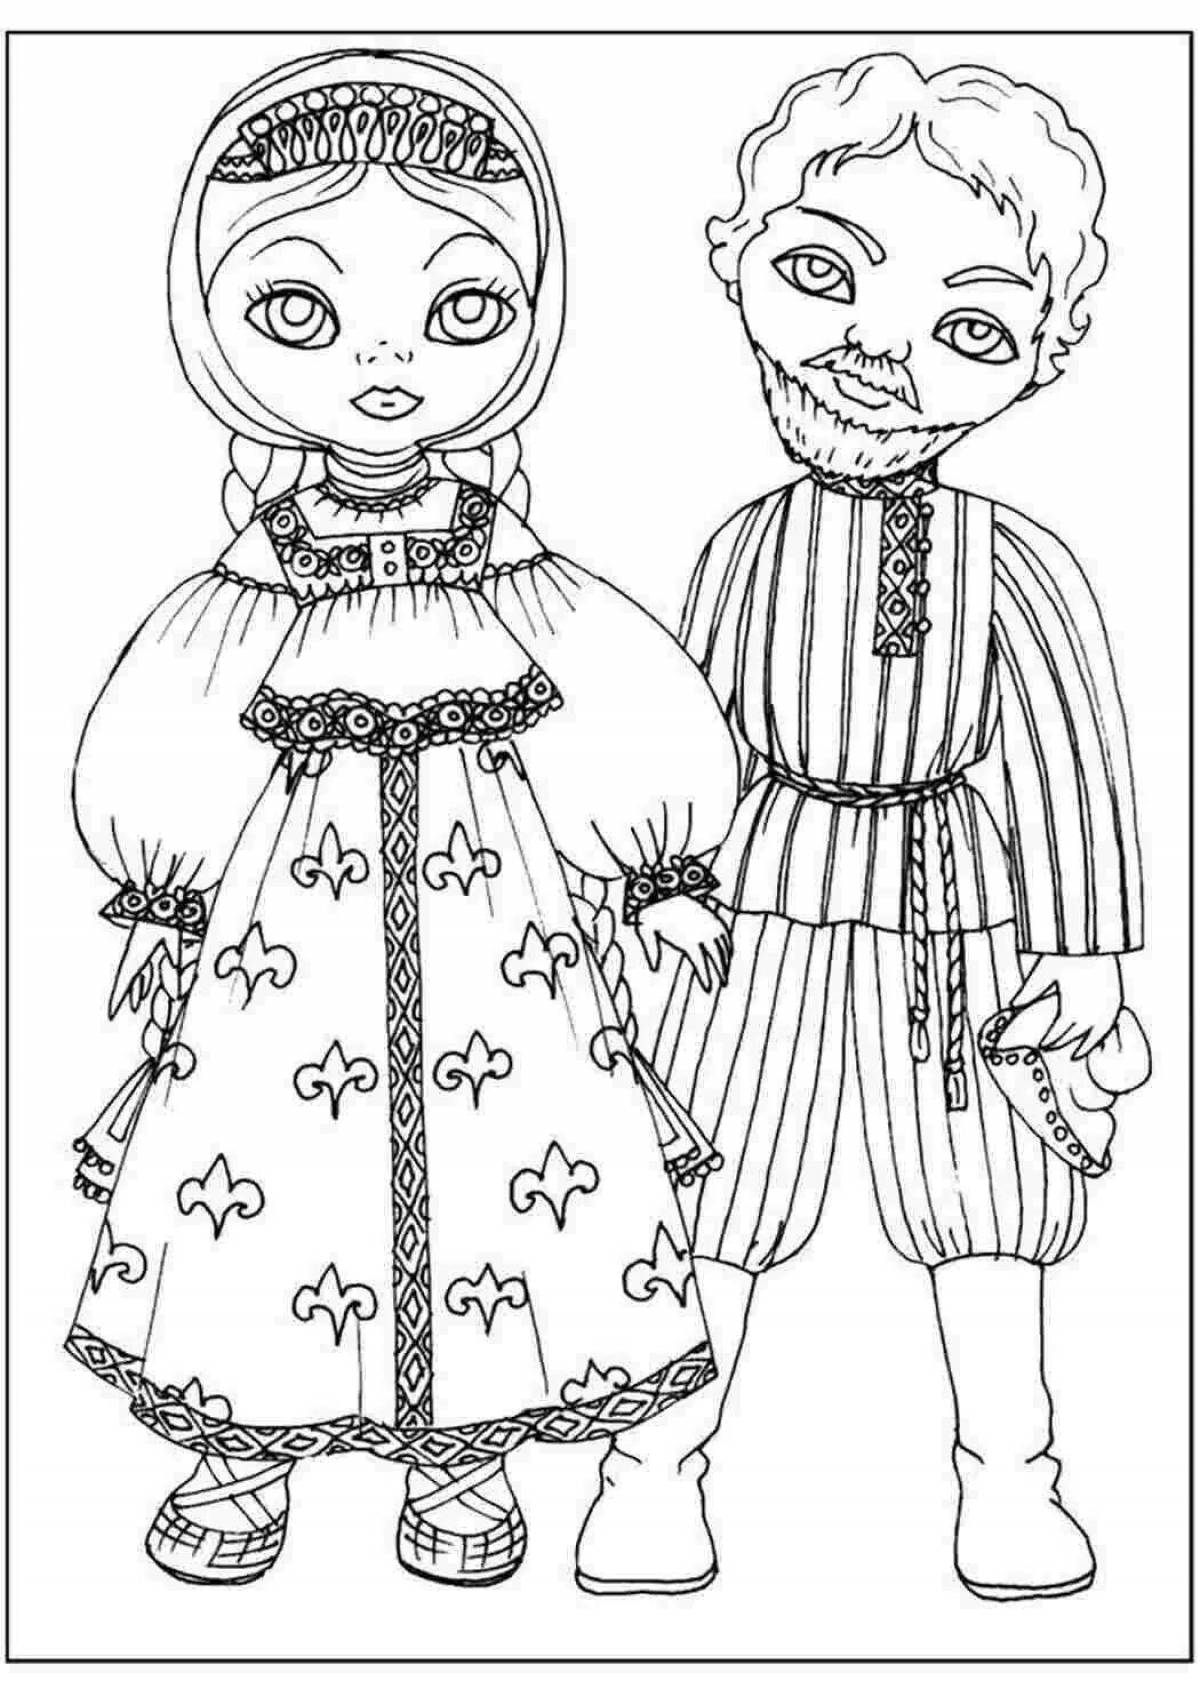 Playful folk costume coloring page for kids